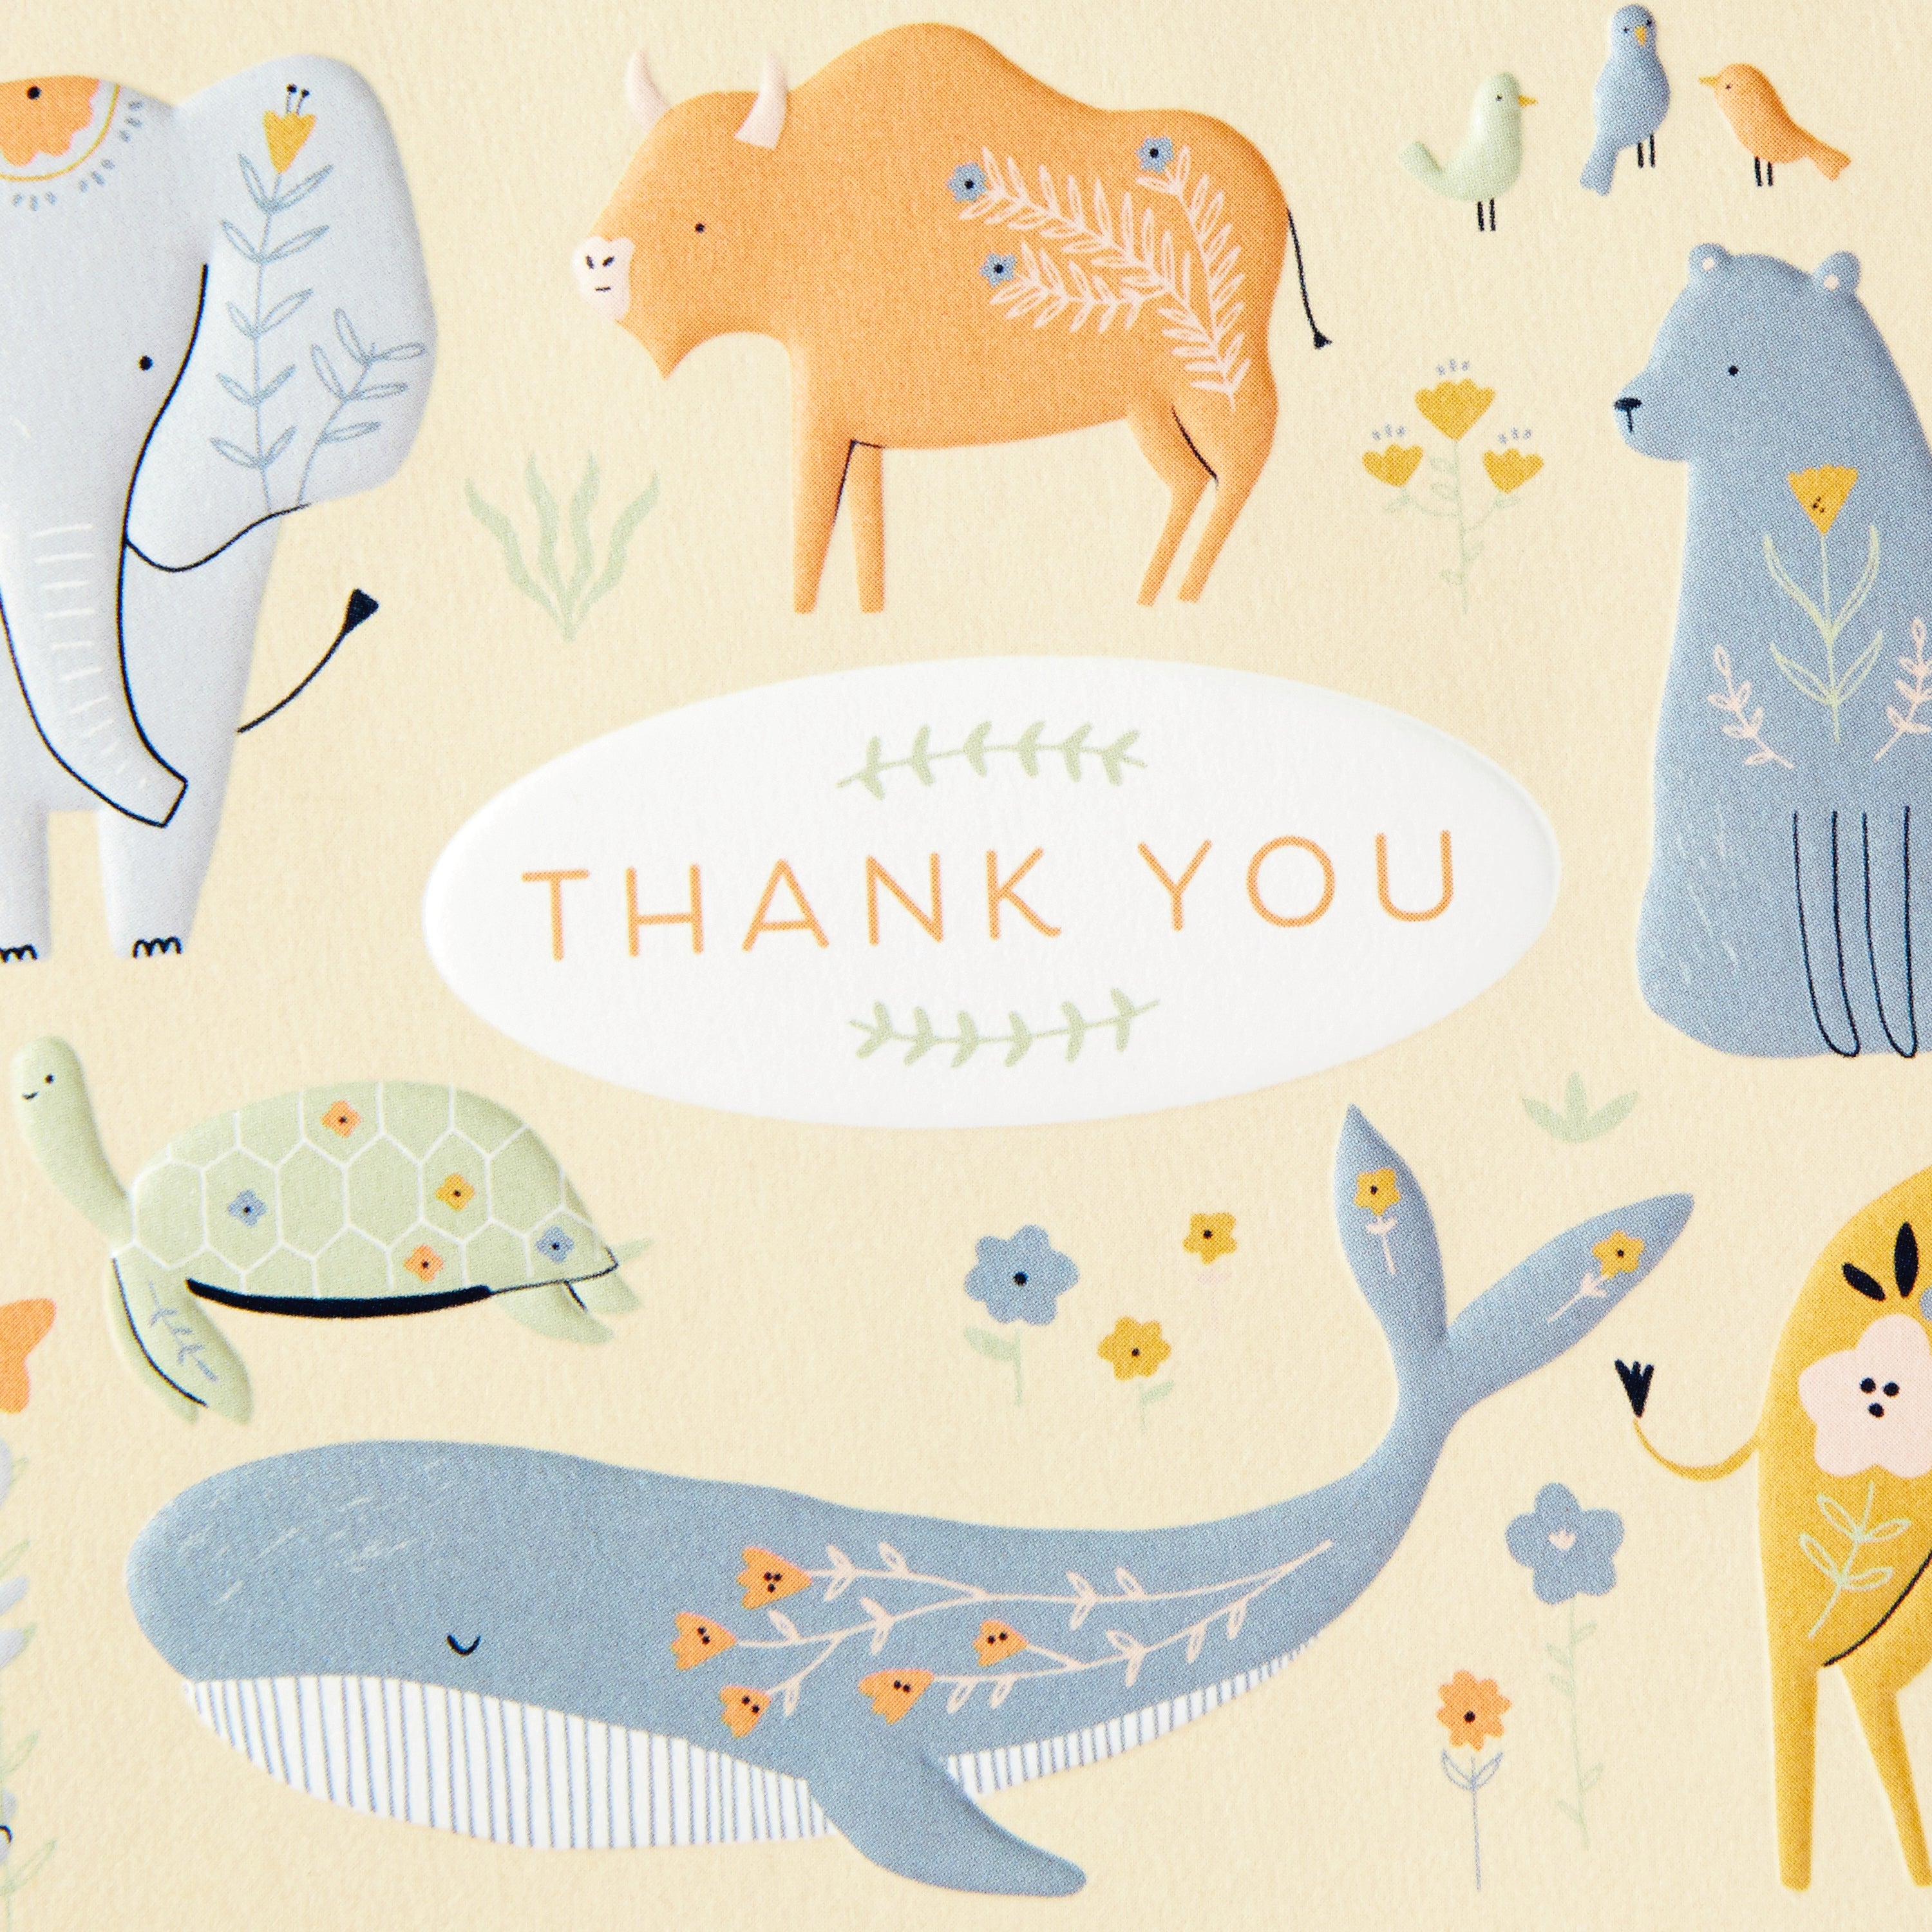 Baby Shower Thank You Cards, Painted Animals (20 Cards with Envelopes for Baby Boy or Baby Girl) Elephant, Koala, Giraffe, Whale, Turtle